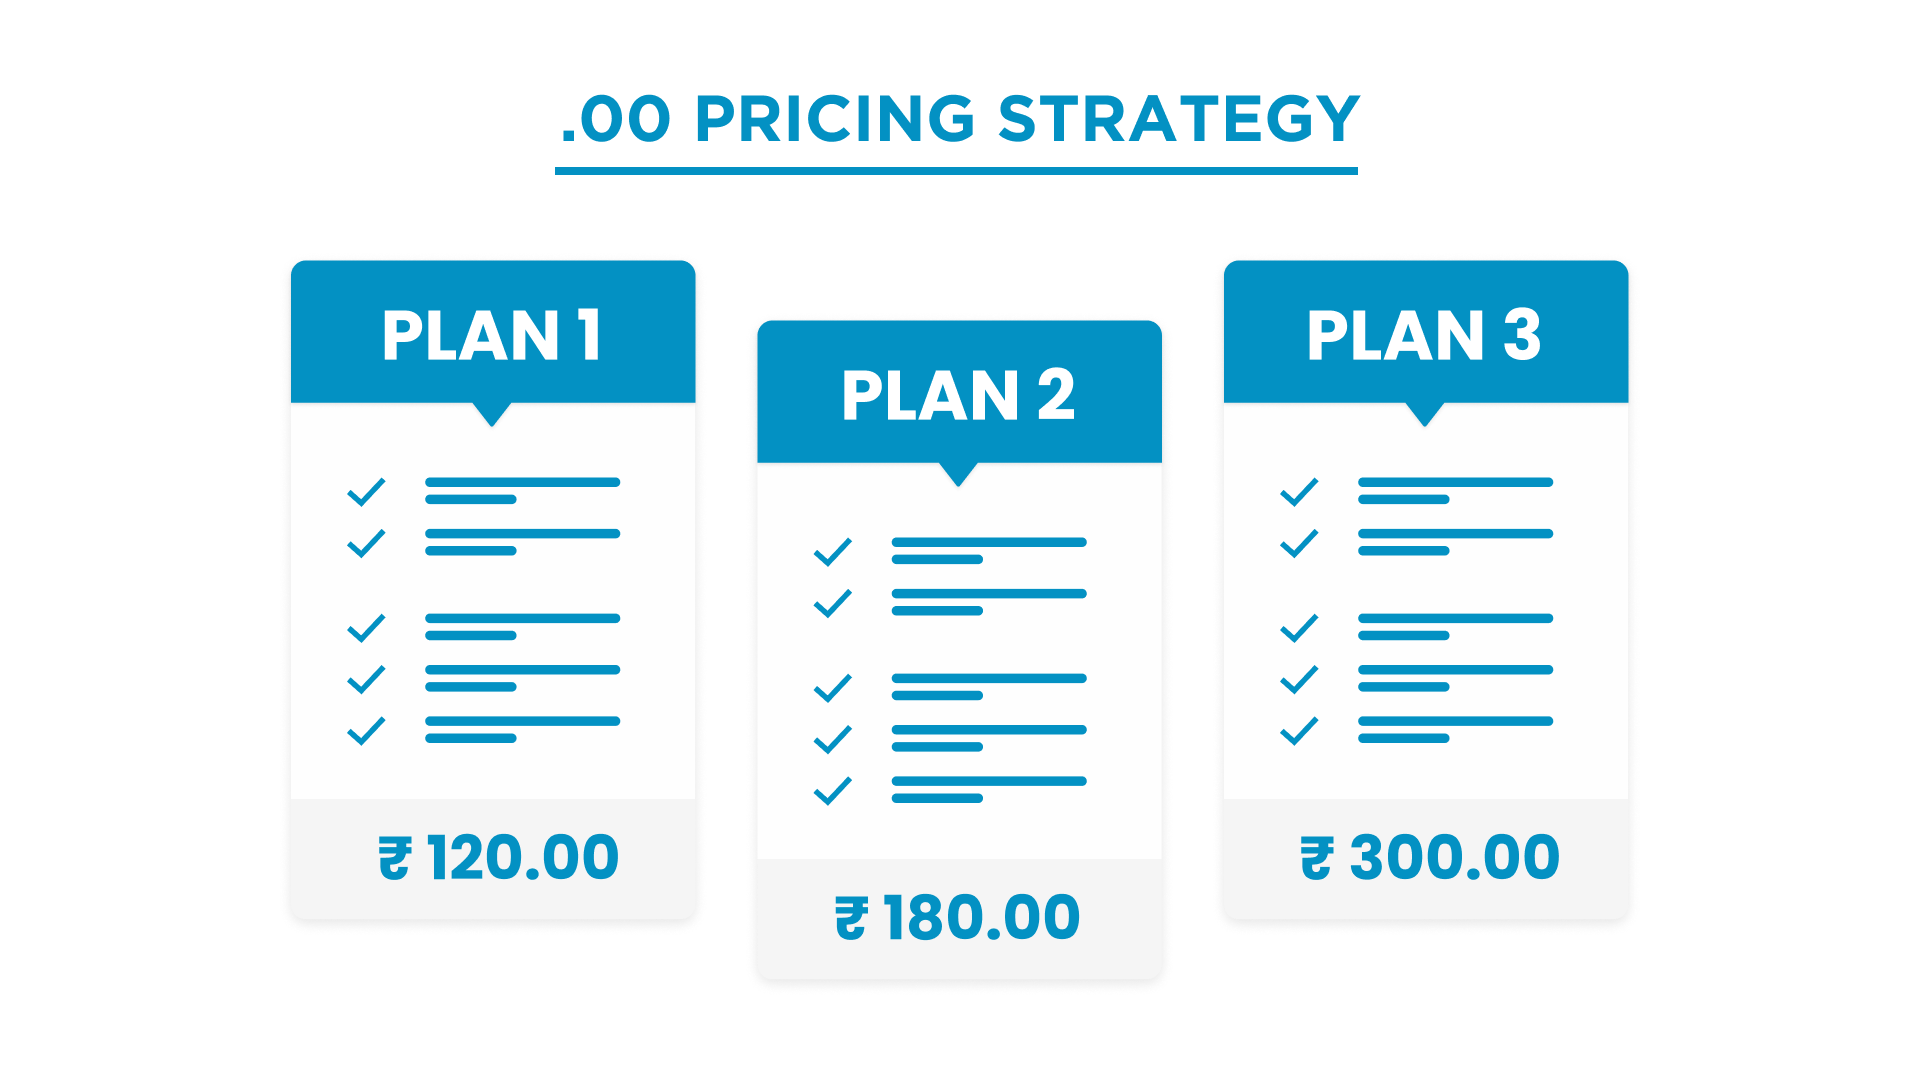 .00 Pricing Strategy